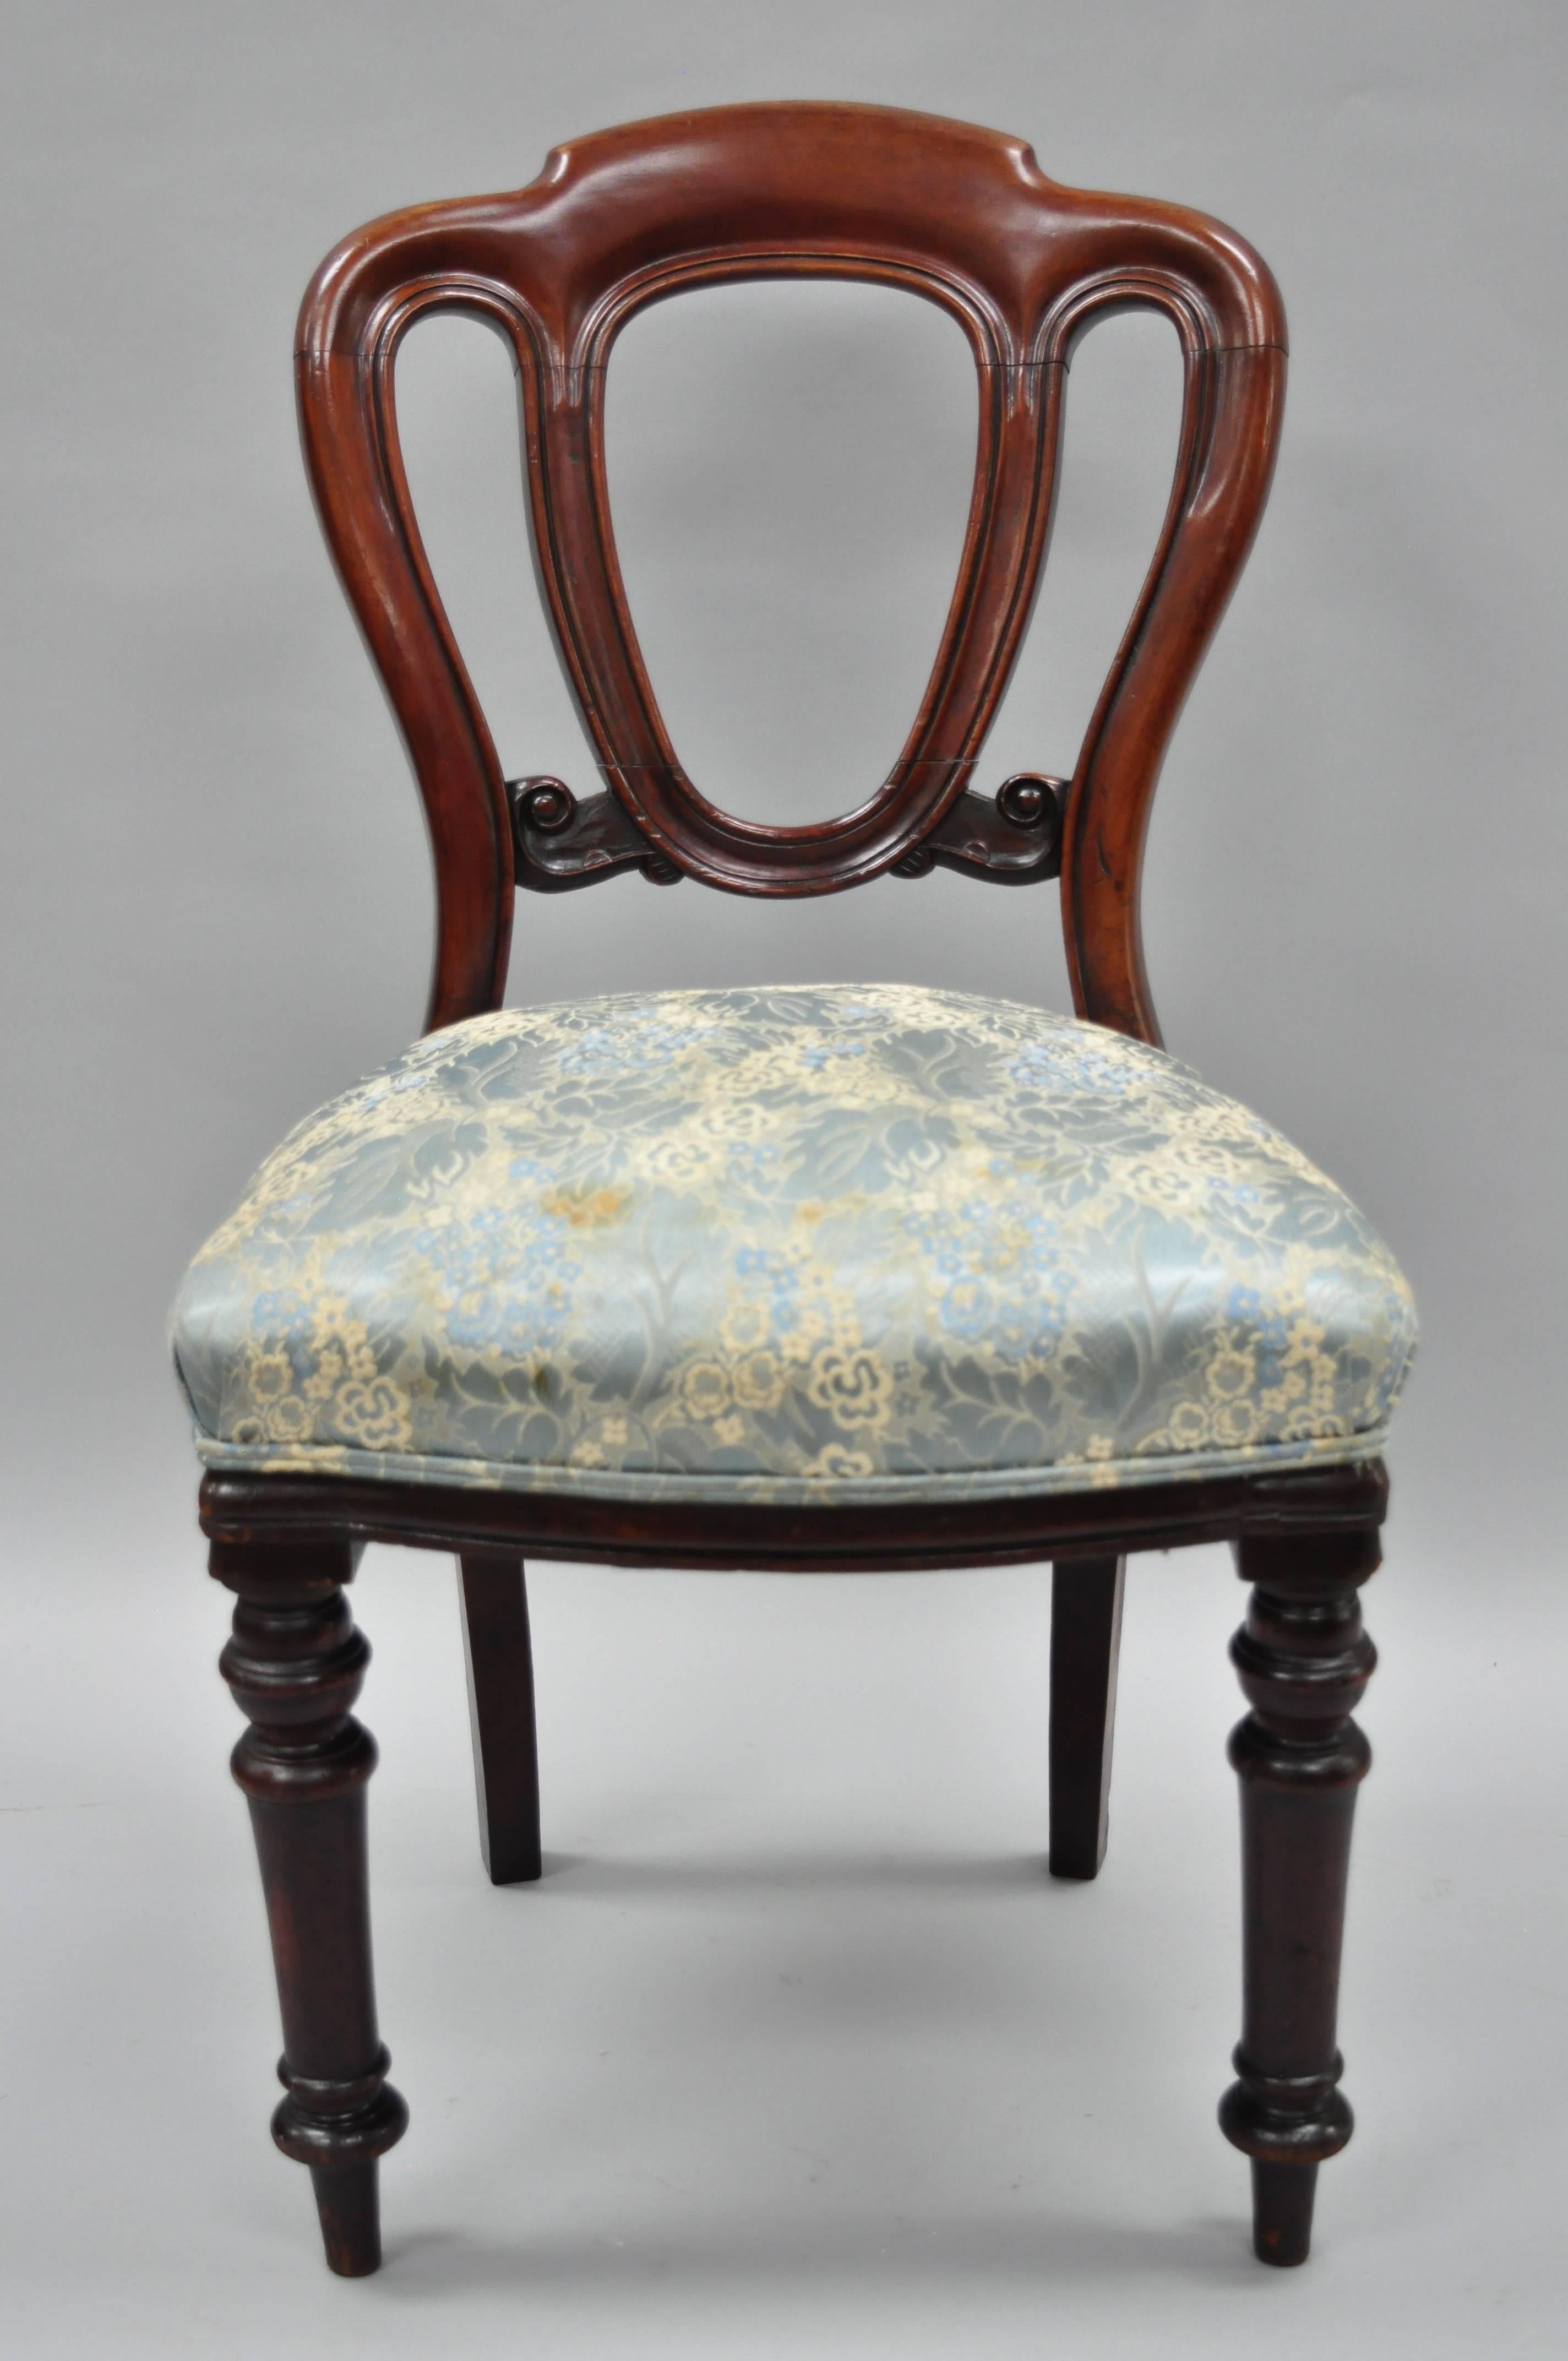 Antique 19th century English Victorian solid mahogany library chair. Item features wonderful authentic warm patina, turn carved legs, heavy solid wood construction, beautiful wood grain, upholstered seat, nicely carved details, circa mid-late 19th